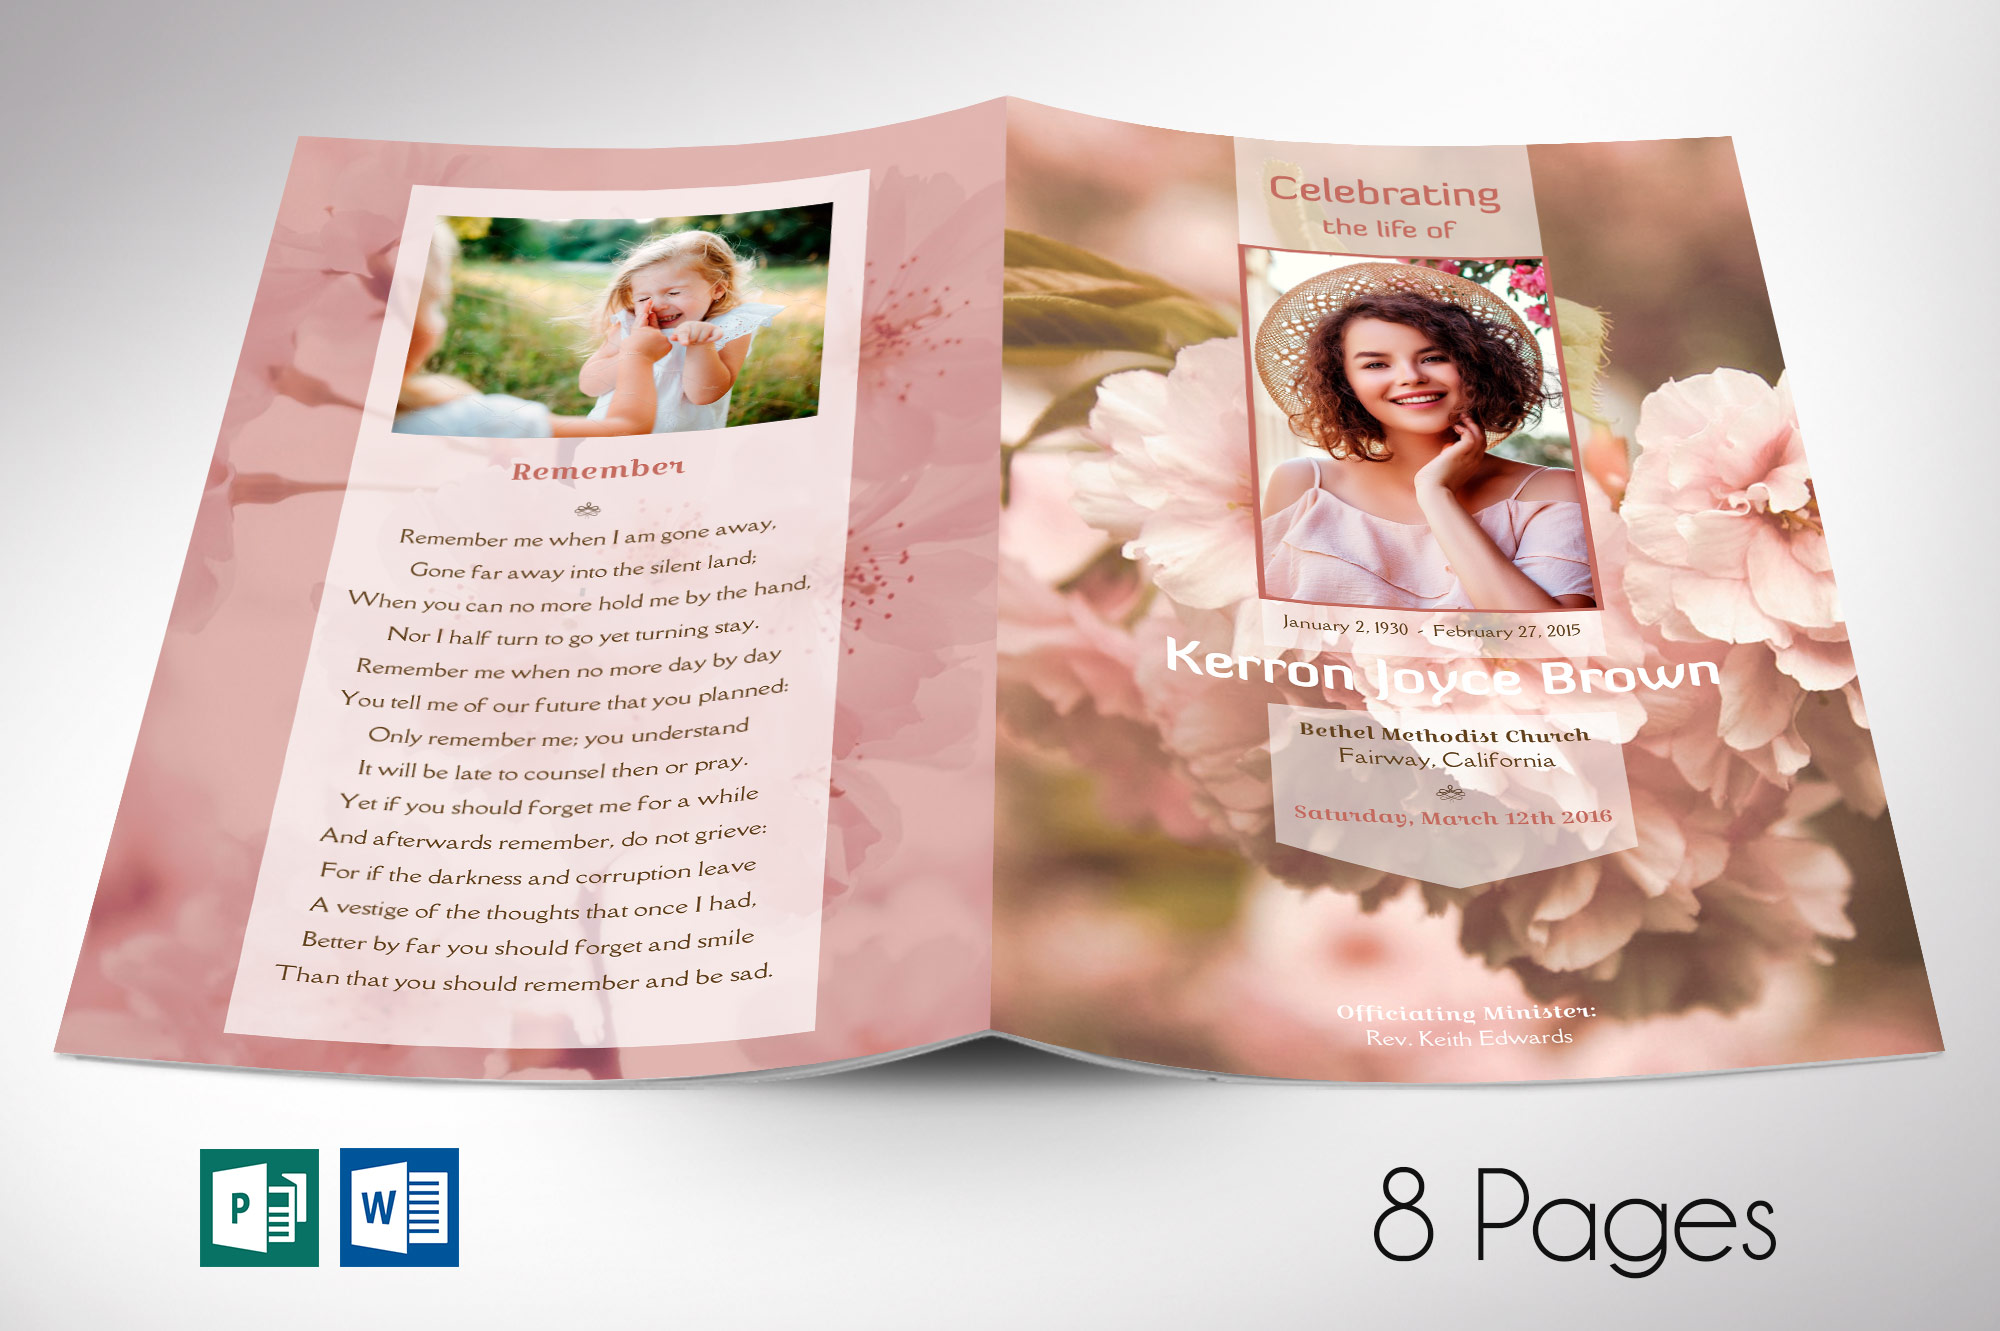 Cherry Bloom Funeral Program Word Publisher Template, 8 Pages